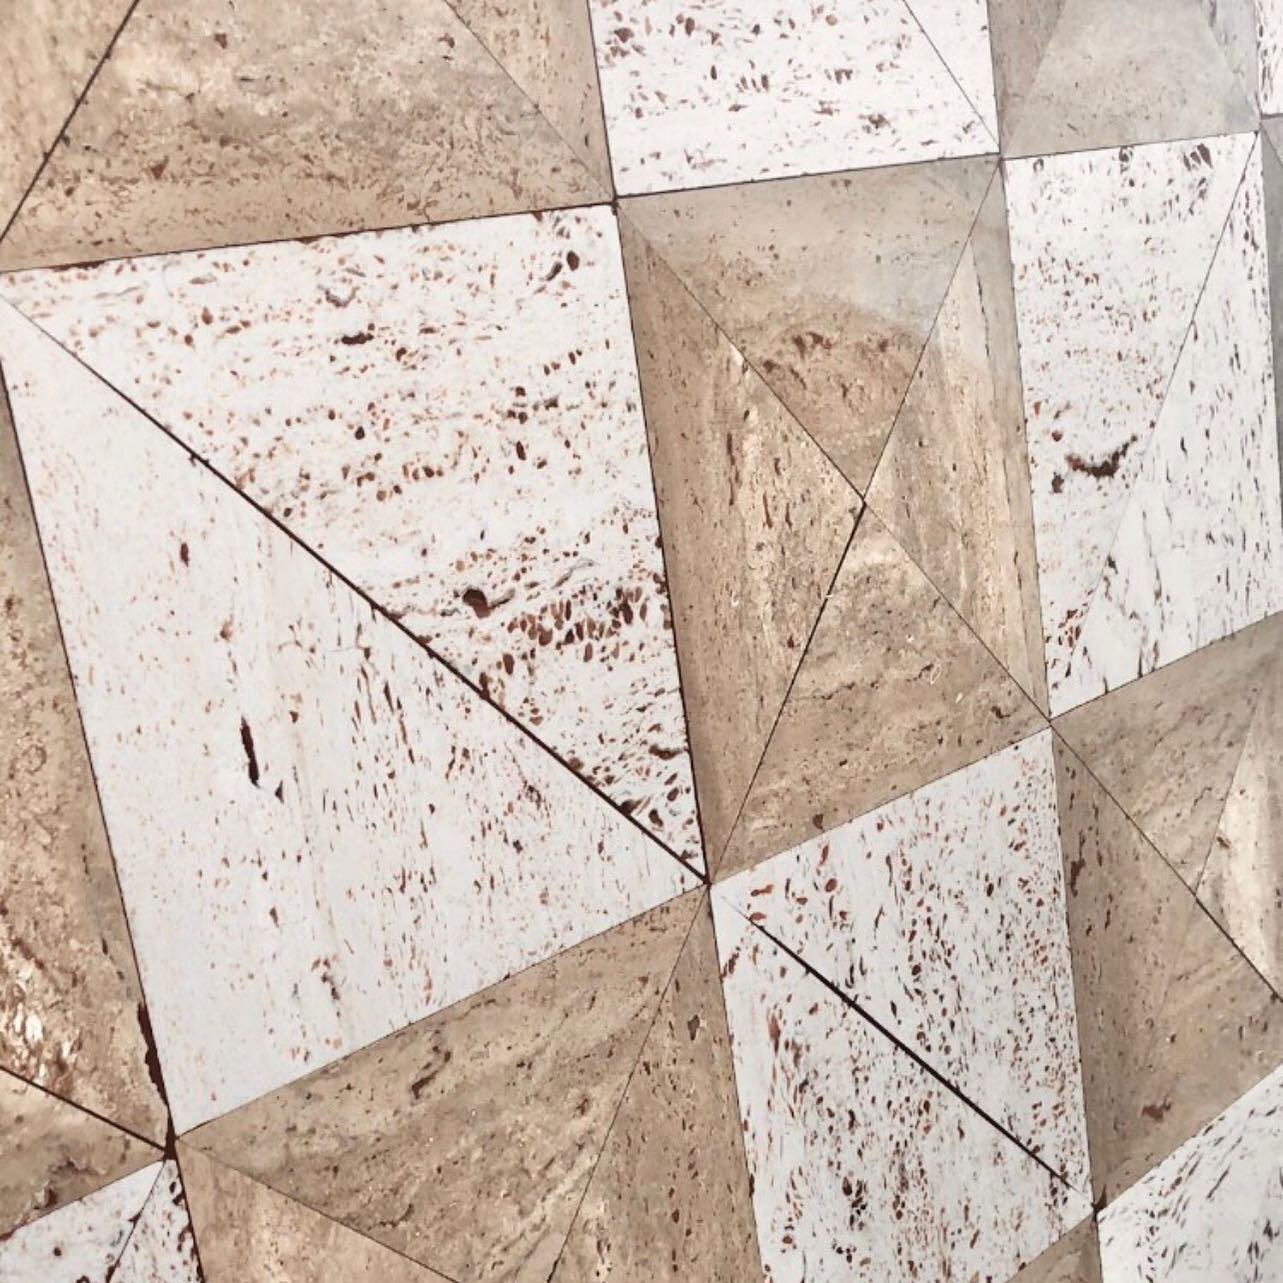 Major #inspo from this travertine checkered tile find by @bettencourtmanor 🙌🏼